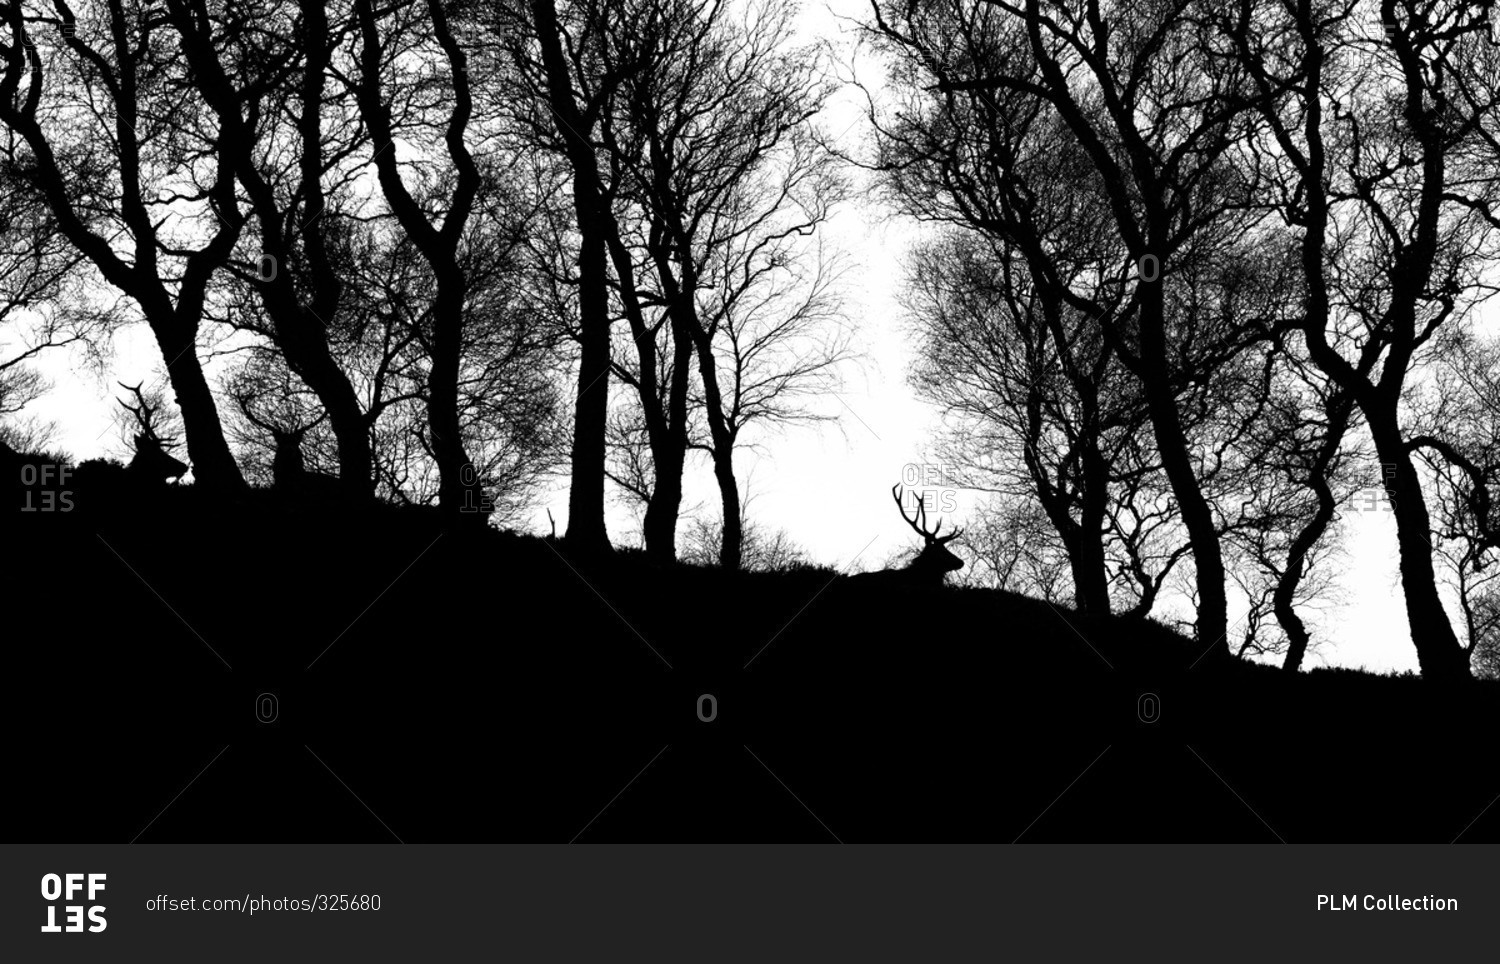 Deer silhouetted on a hill